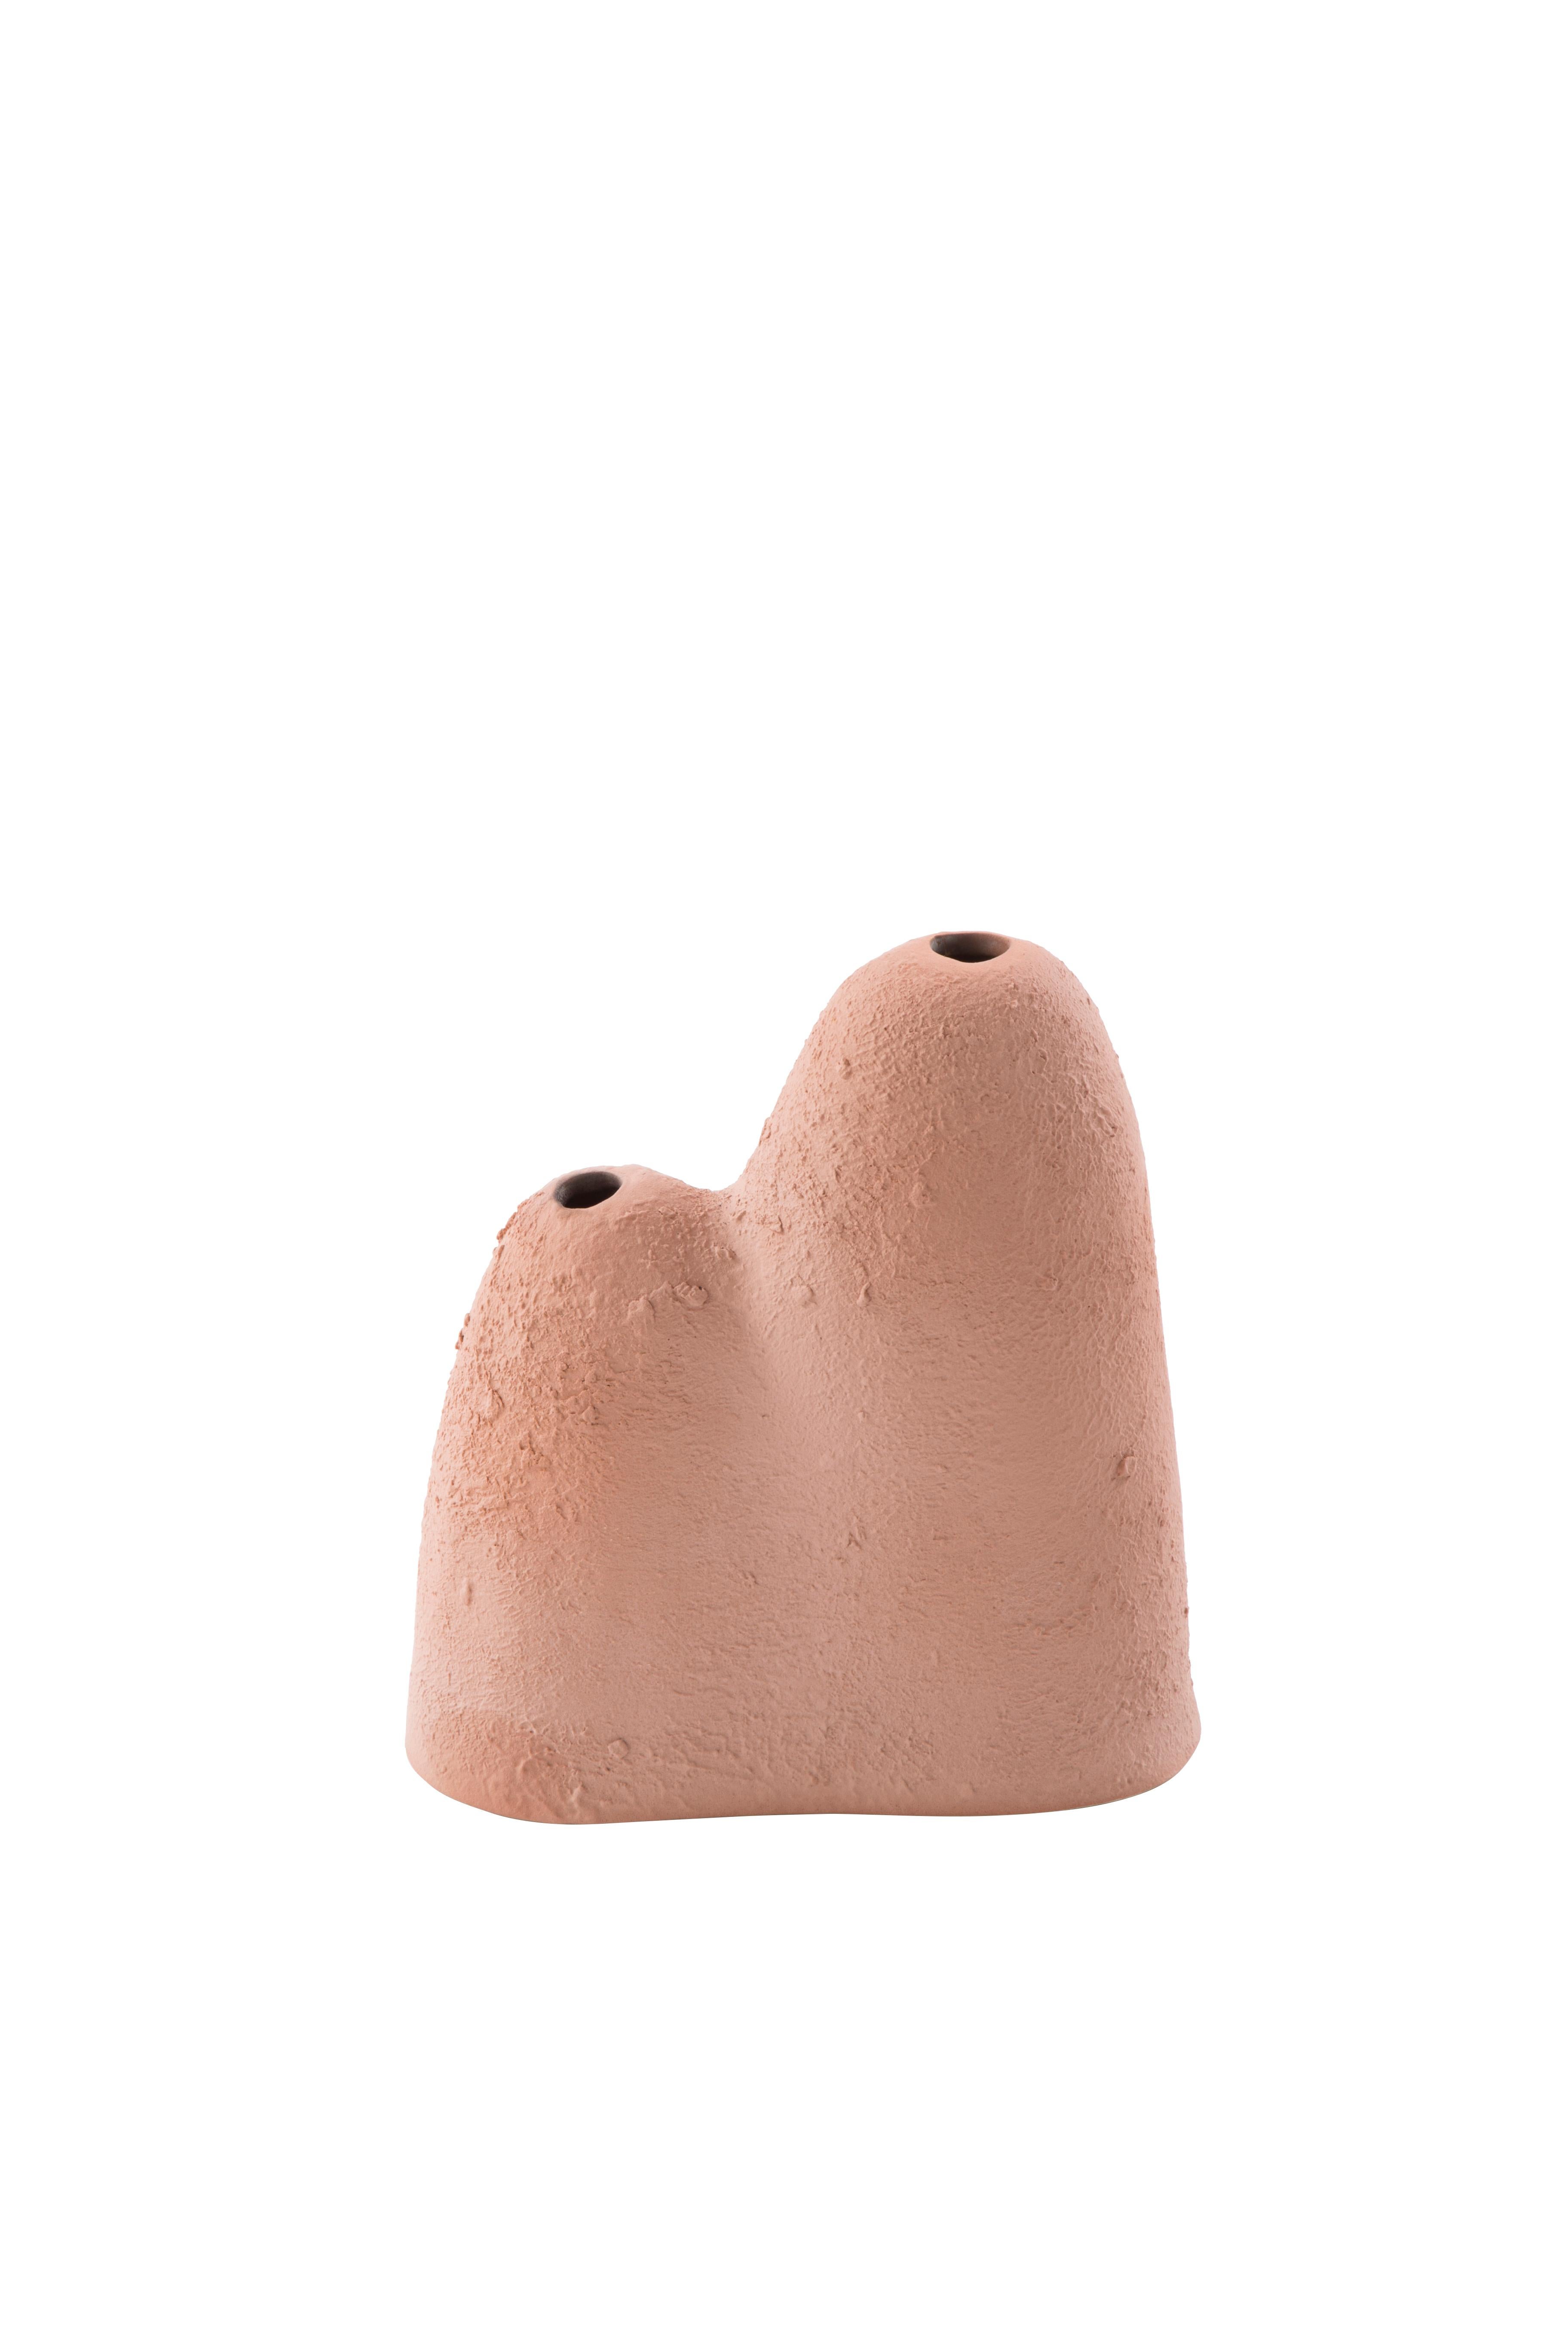 Post-Modern Mountain Small Umbra Vase by Pulpo For Sale